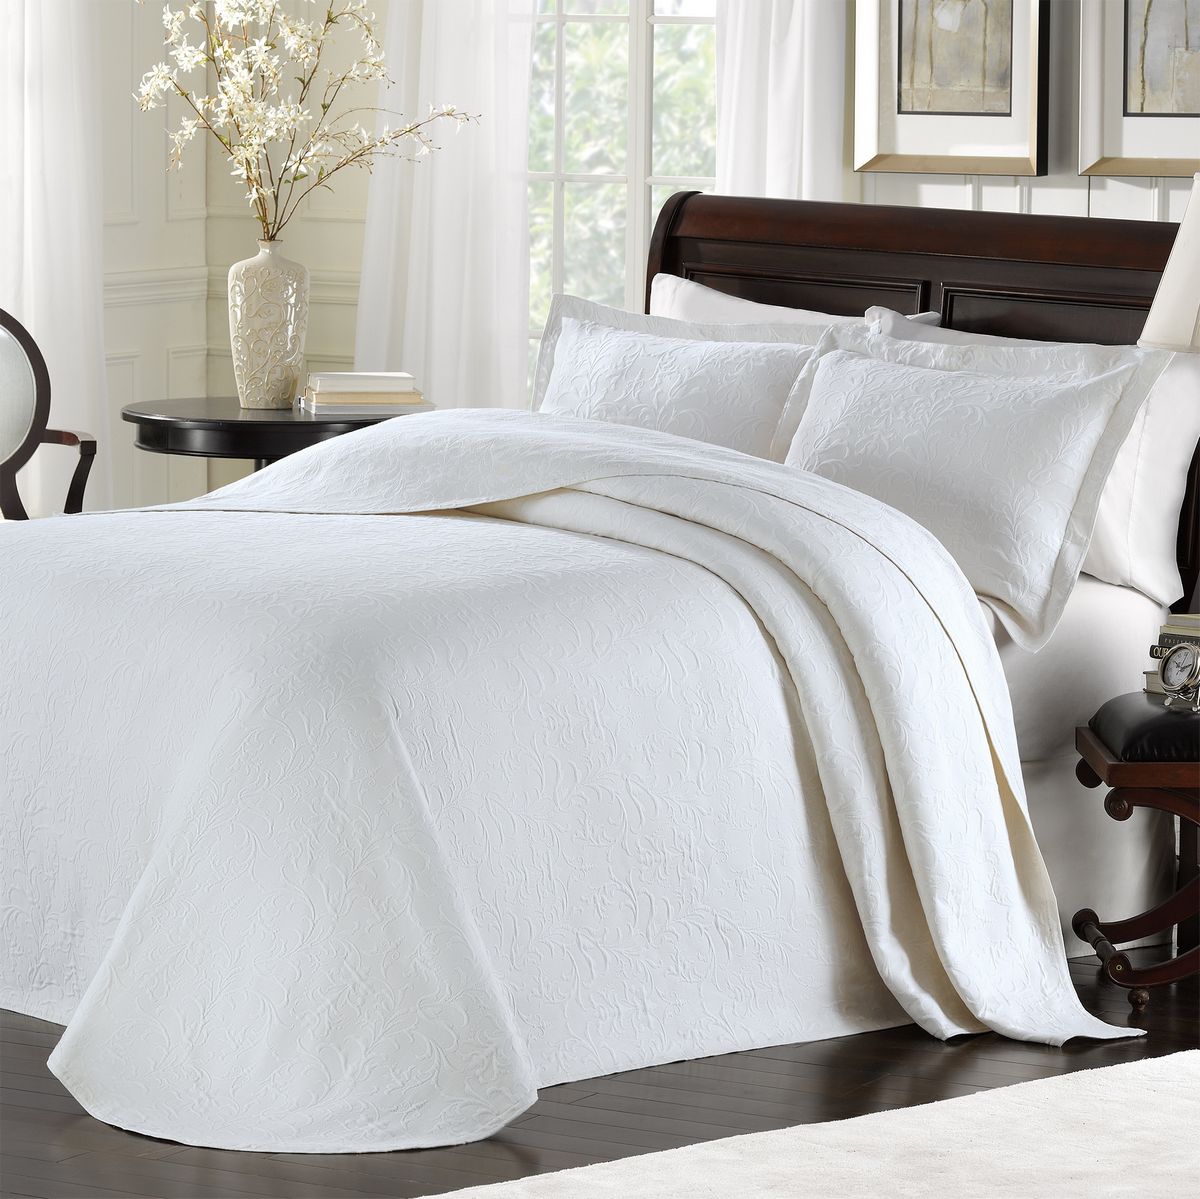 Majestic White Bedspread by Lamont Home - BeddingSuperStore.com